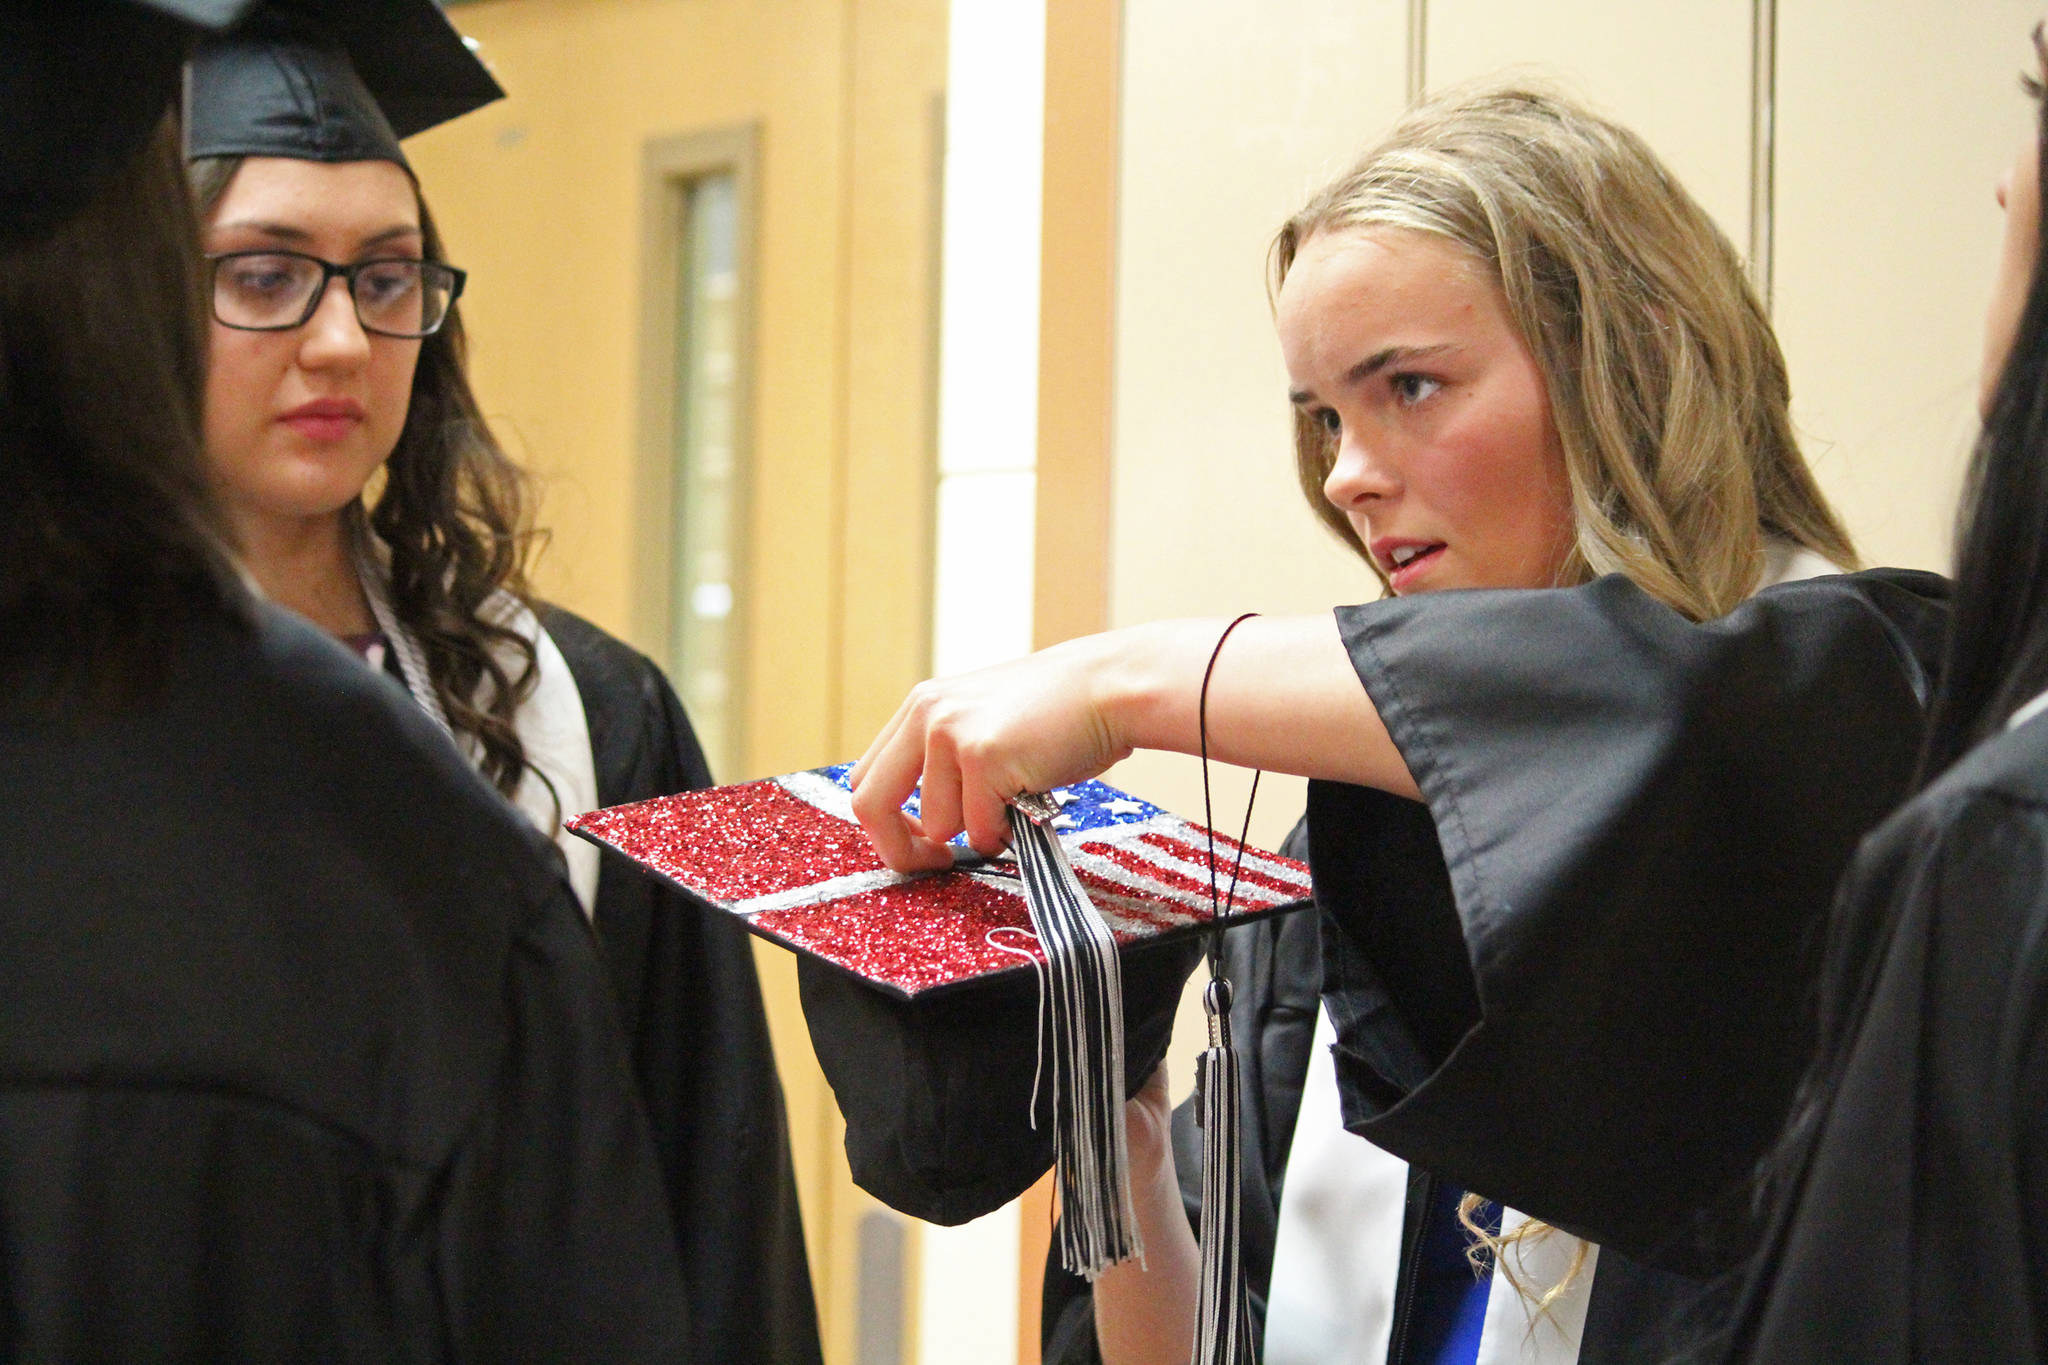 Sofie Nielsen, 16, secures a tassel onto her graduation cap just before walking with the 2017 graduating class of Nikiski Middle-High School on Tuesday, May 23, 2017 at the school’s gymnasium in Nikiski, Alaska. A foreign exchange student from Denmark, Nielsen will return home to complete high school this fall, but said she couldn’t pass up the opportunity to walk with her classmates when offered the chance. (Megan Pacer/Peninsula Clarion)